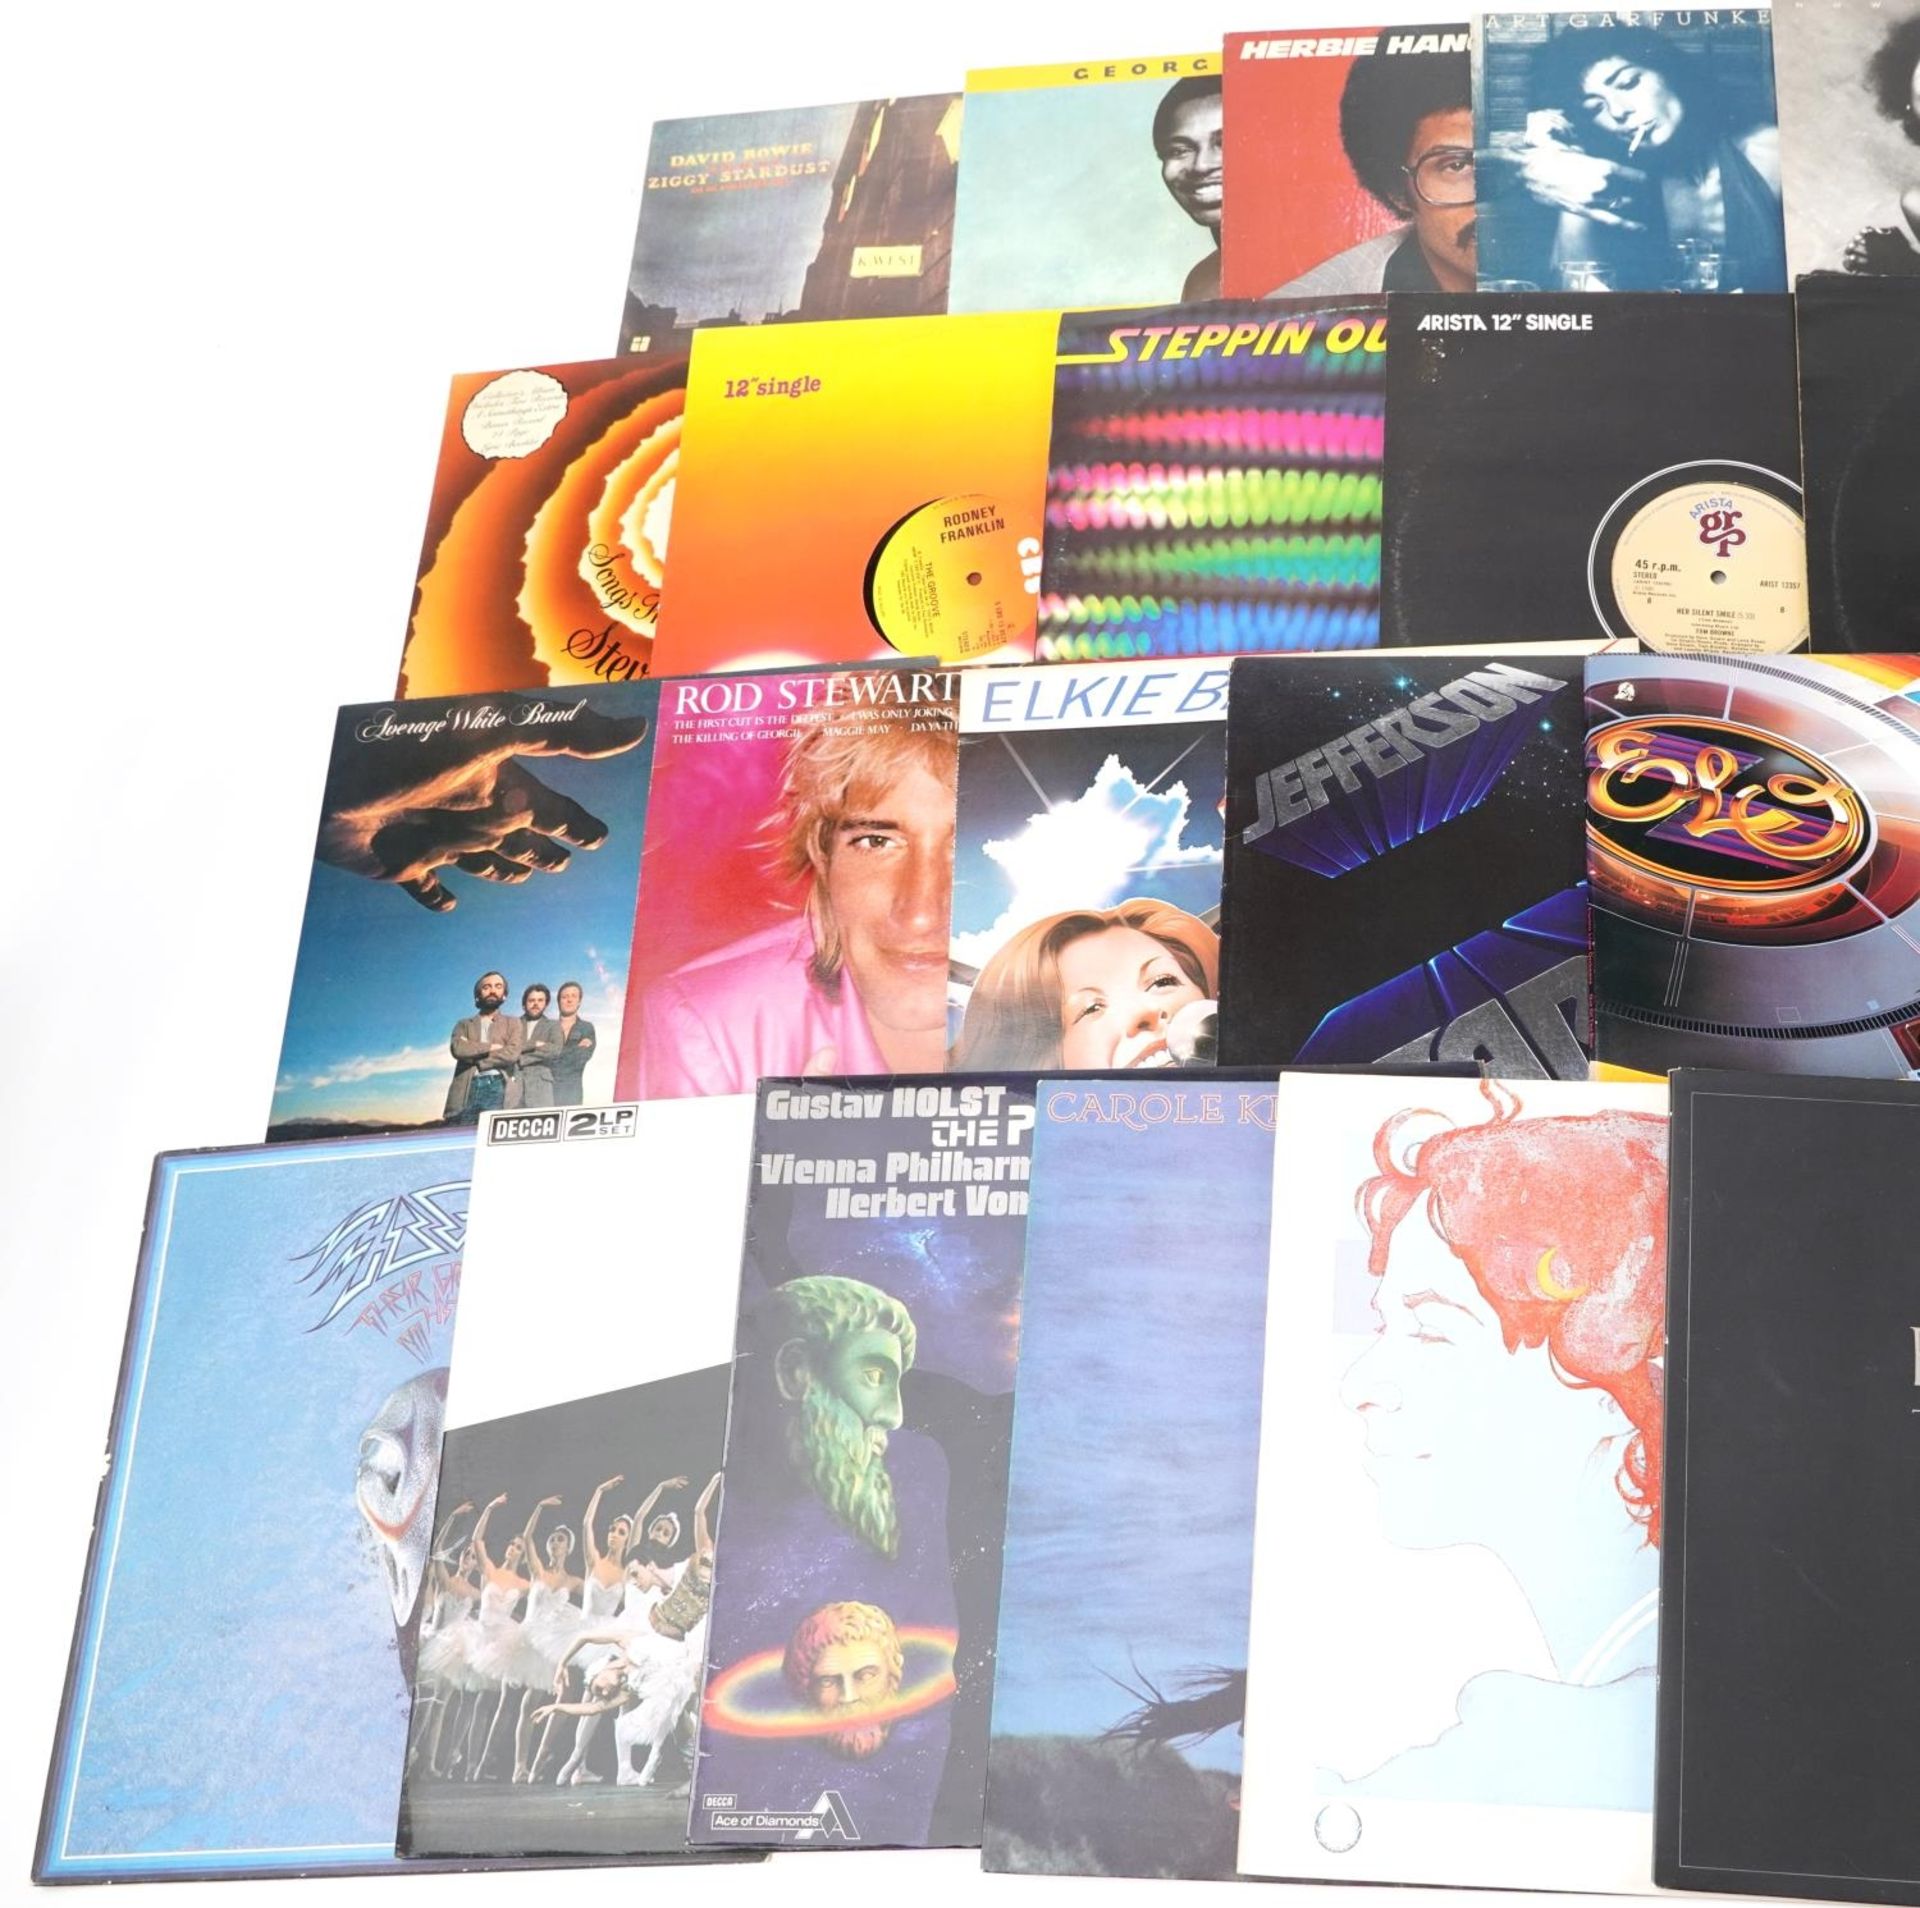 Vinyl LP records including Frank Sinatra, Rod Stewart, David Bowie, Electric Light Orchestra and The - Image 2 of 4